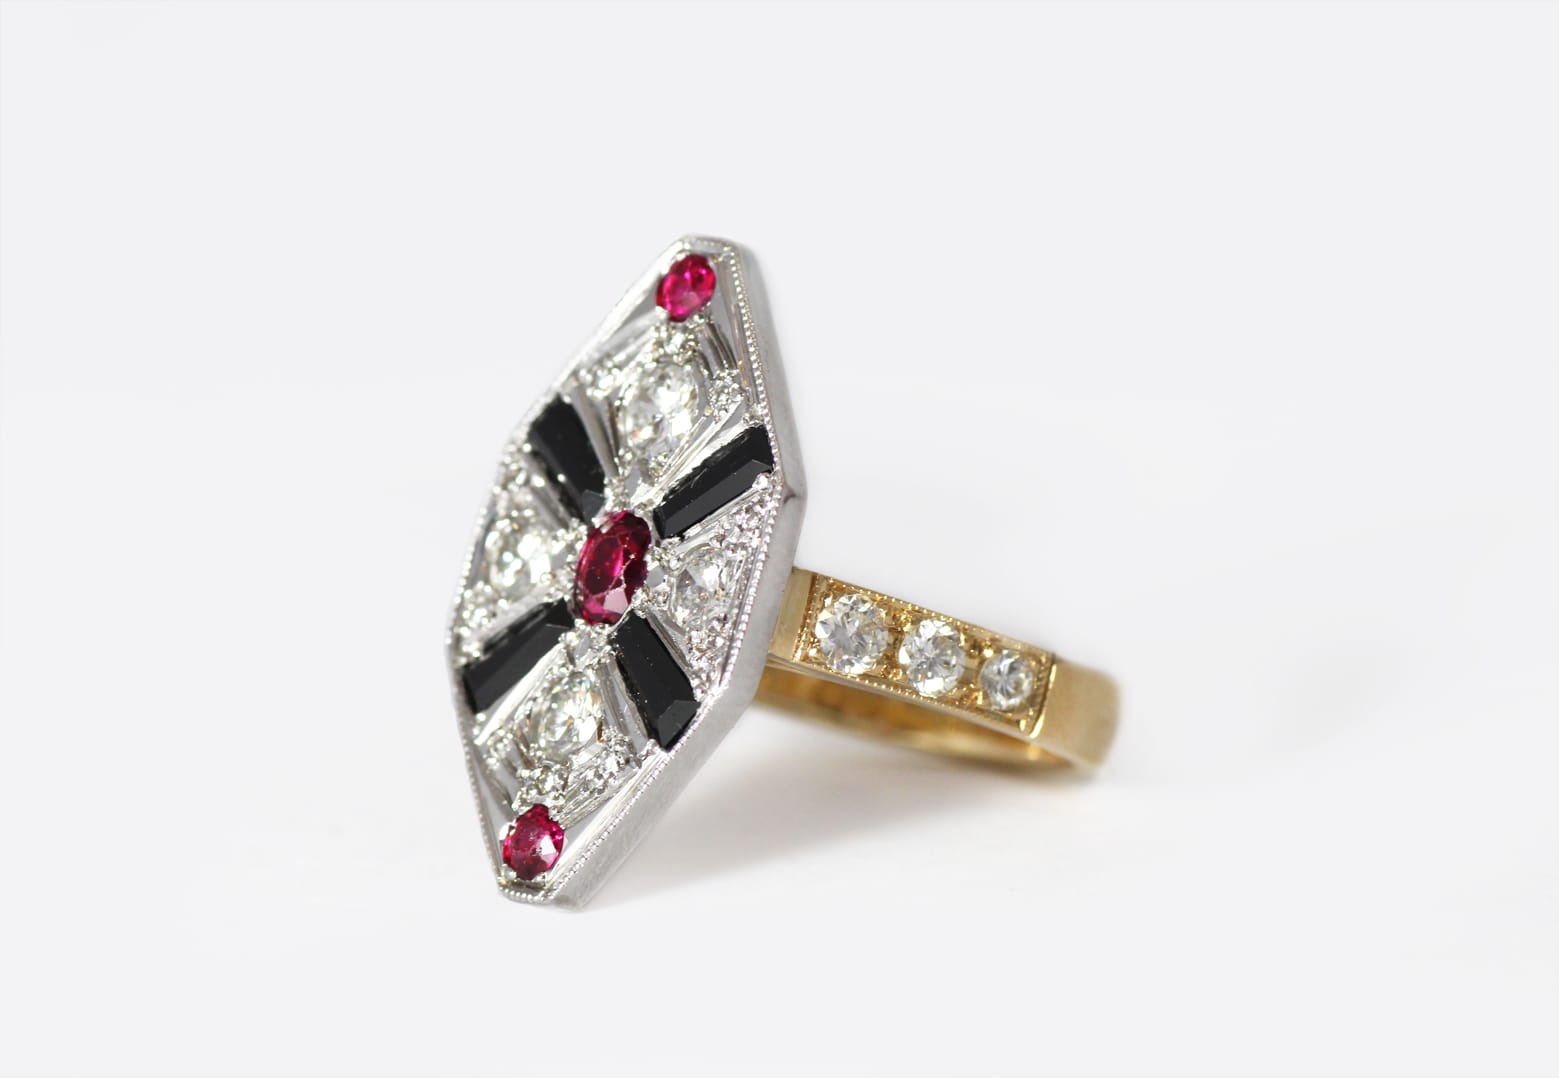 Recycled gold with rubies, diamonds and black spinel by Zoe Pook Jewellery